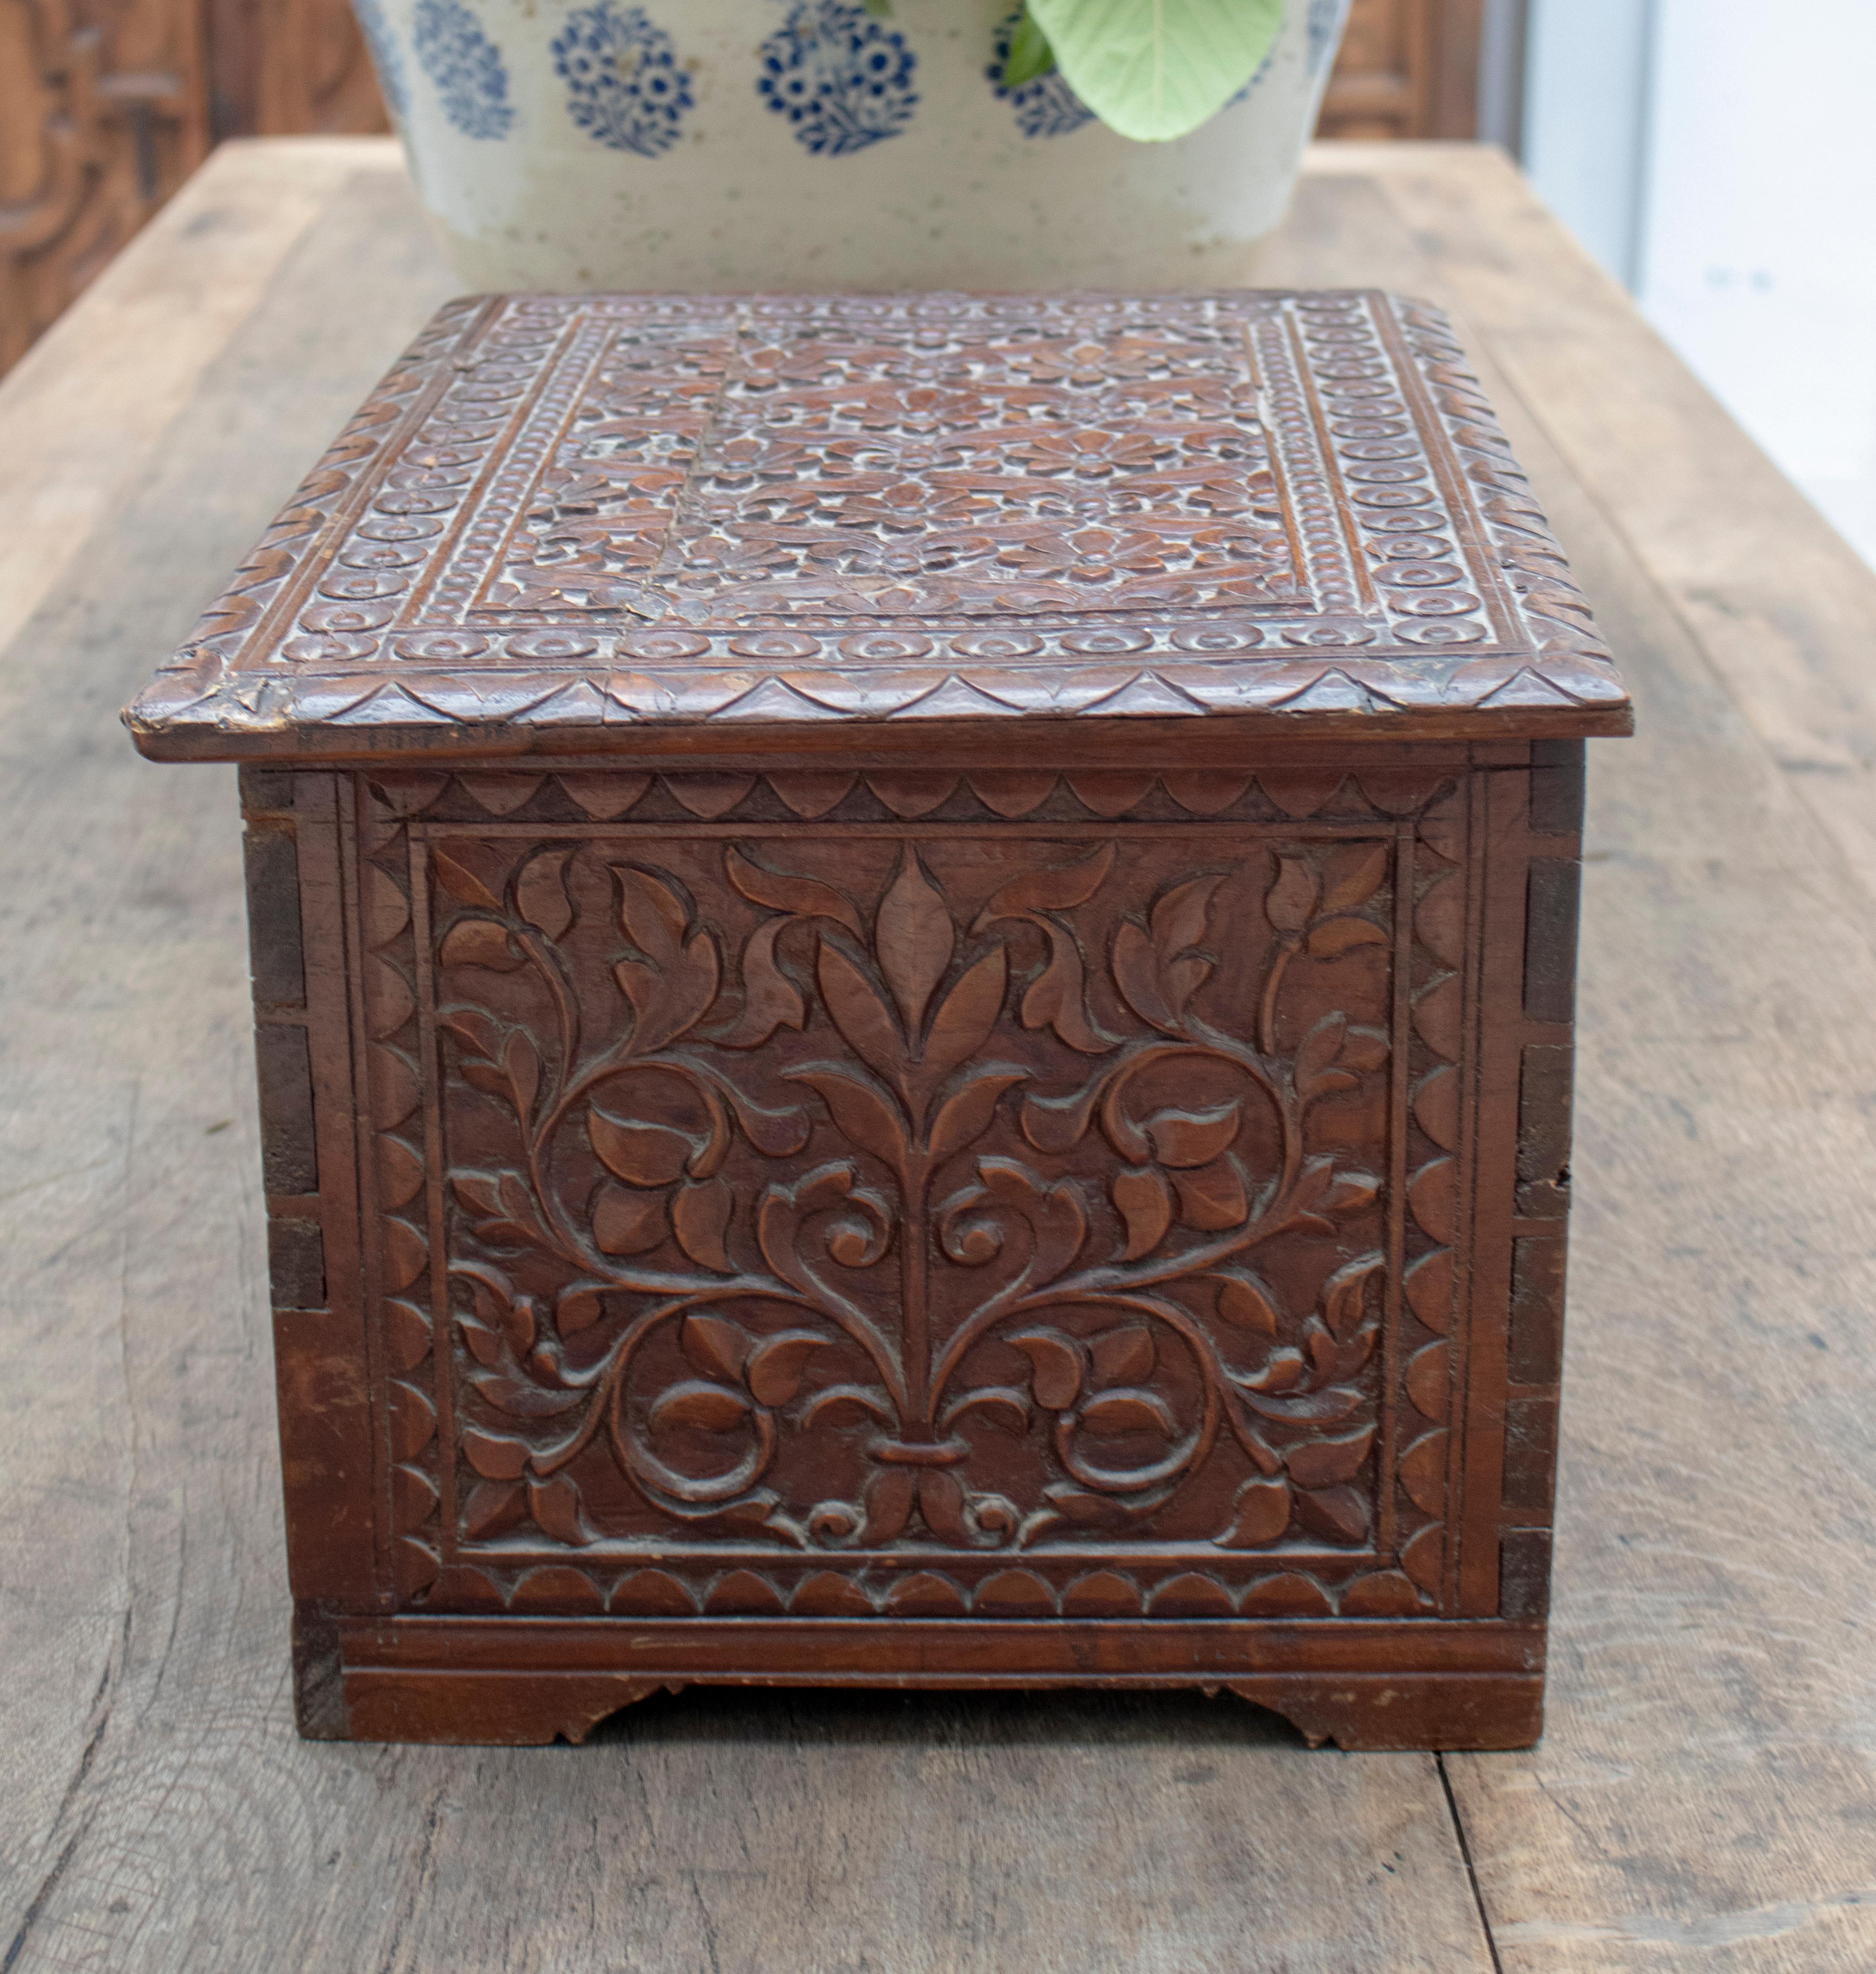 18th Century 19th Century Anglo-Indian Hand Carved Tropical Wood Box For Sale